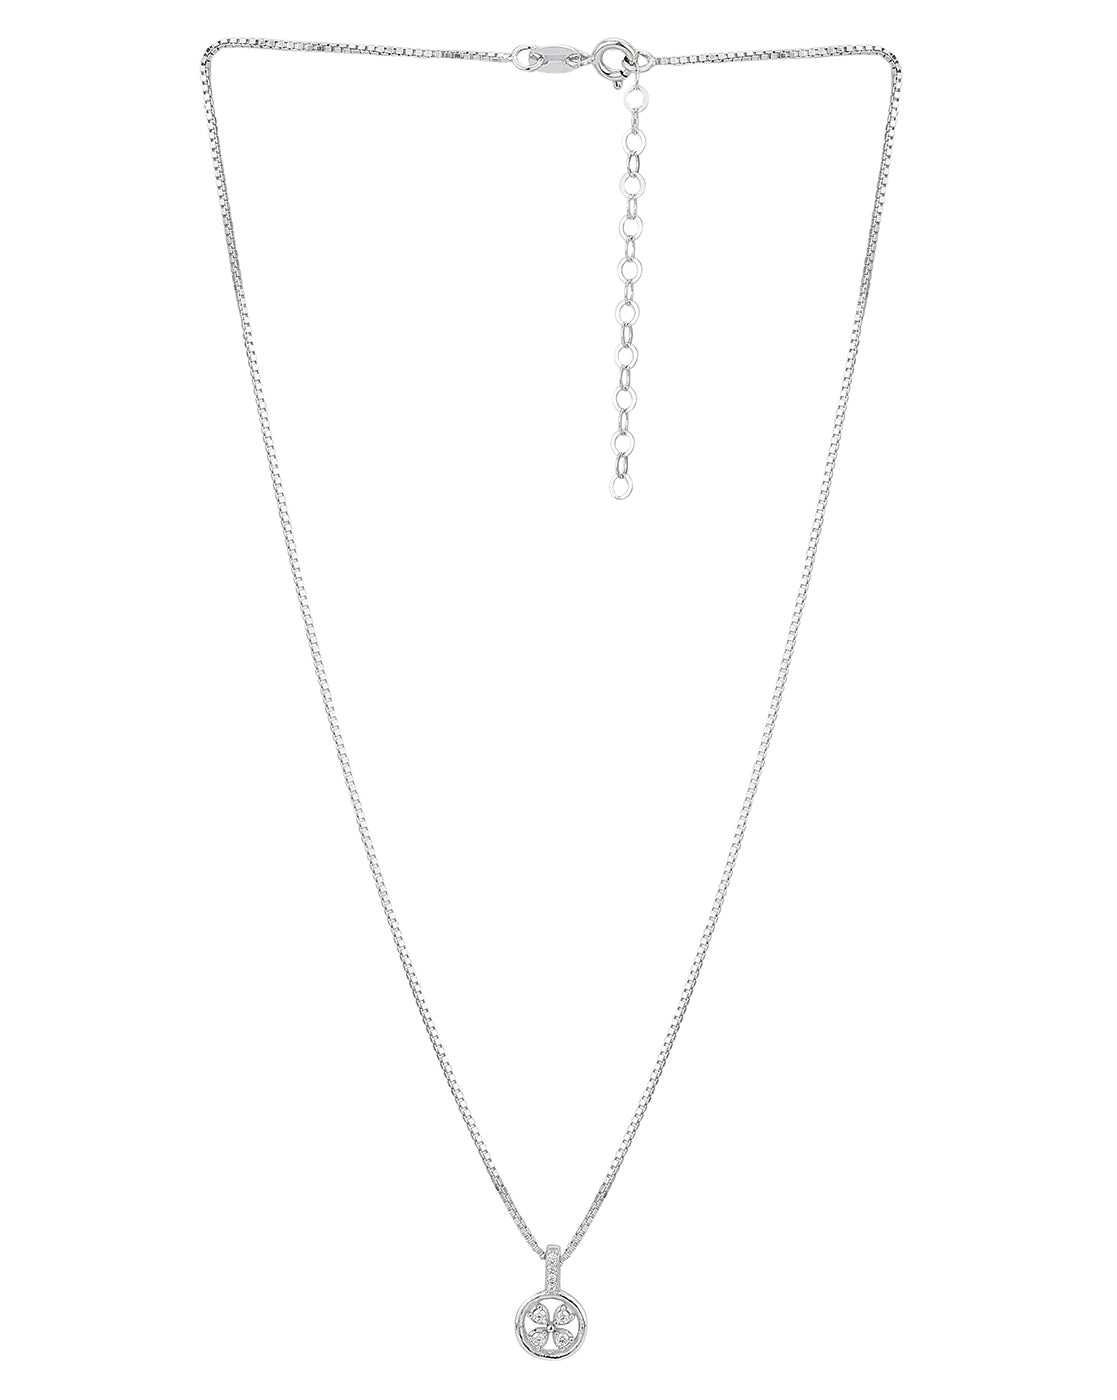 Carlton London  Rhodium Plated With Round Floral Pendant With Chain